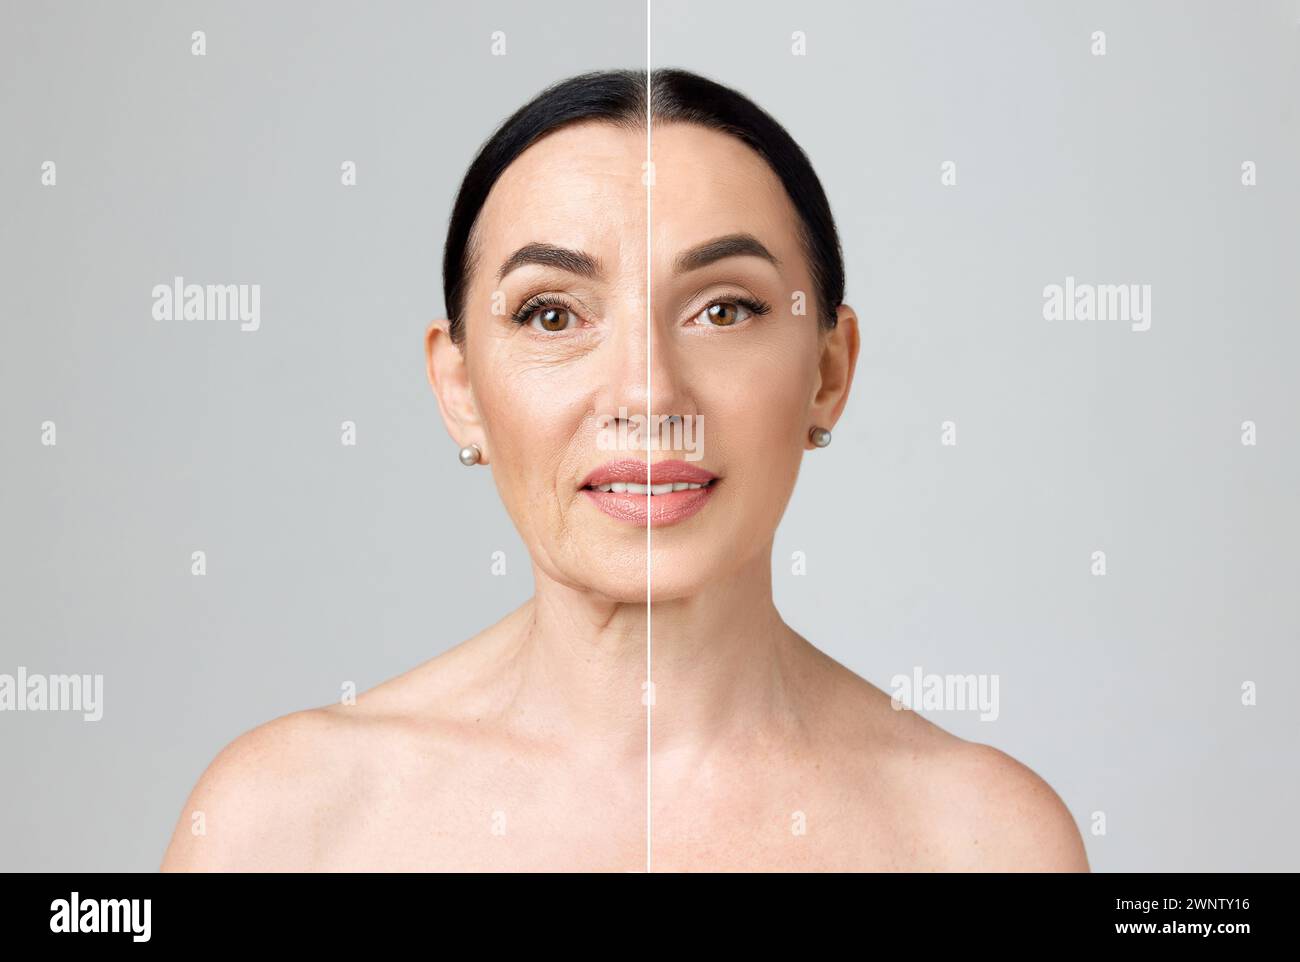 Before-after collage of mature woman showing aging signs and soft, smooth skin after facial care procedures against grey studio background. Stock Photo